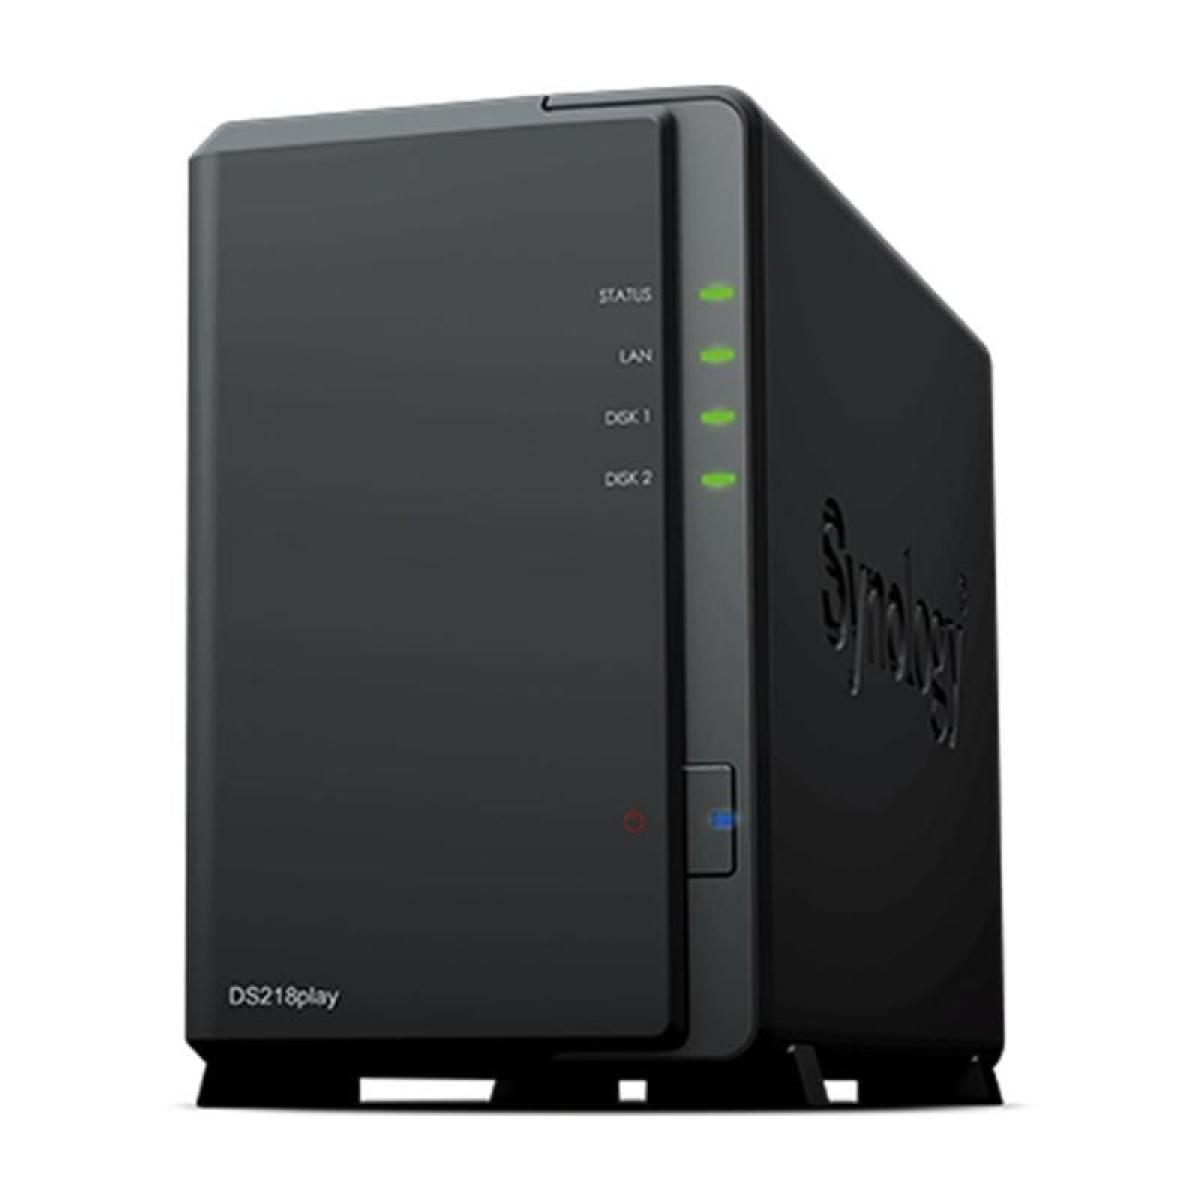 NAS SYNOLOGY DISKSTATION DS218PLAY/ 2 BAHIAS 3.5"- 2.5"/ 1GB DDR4/ FORMATO TORRE